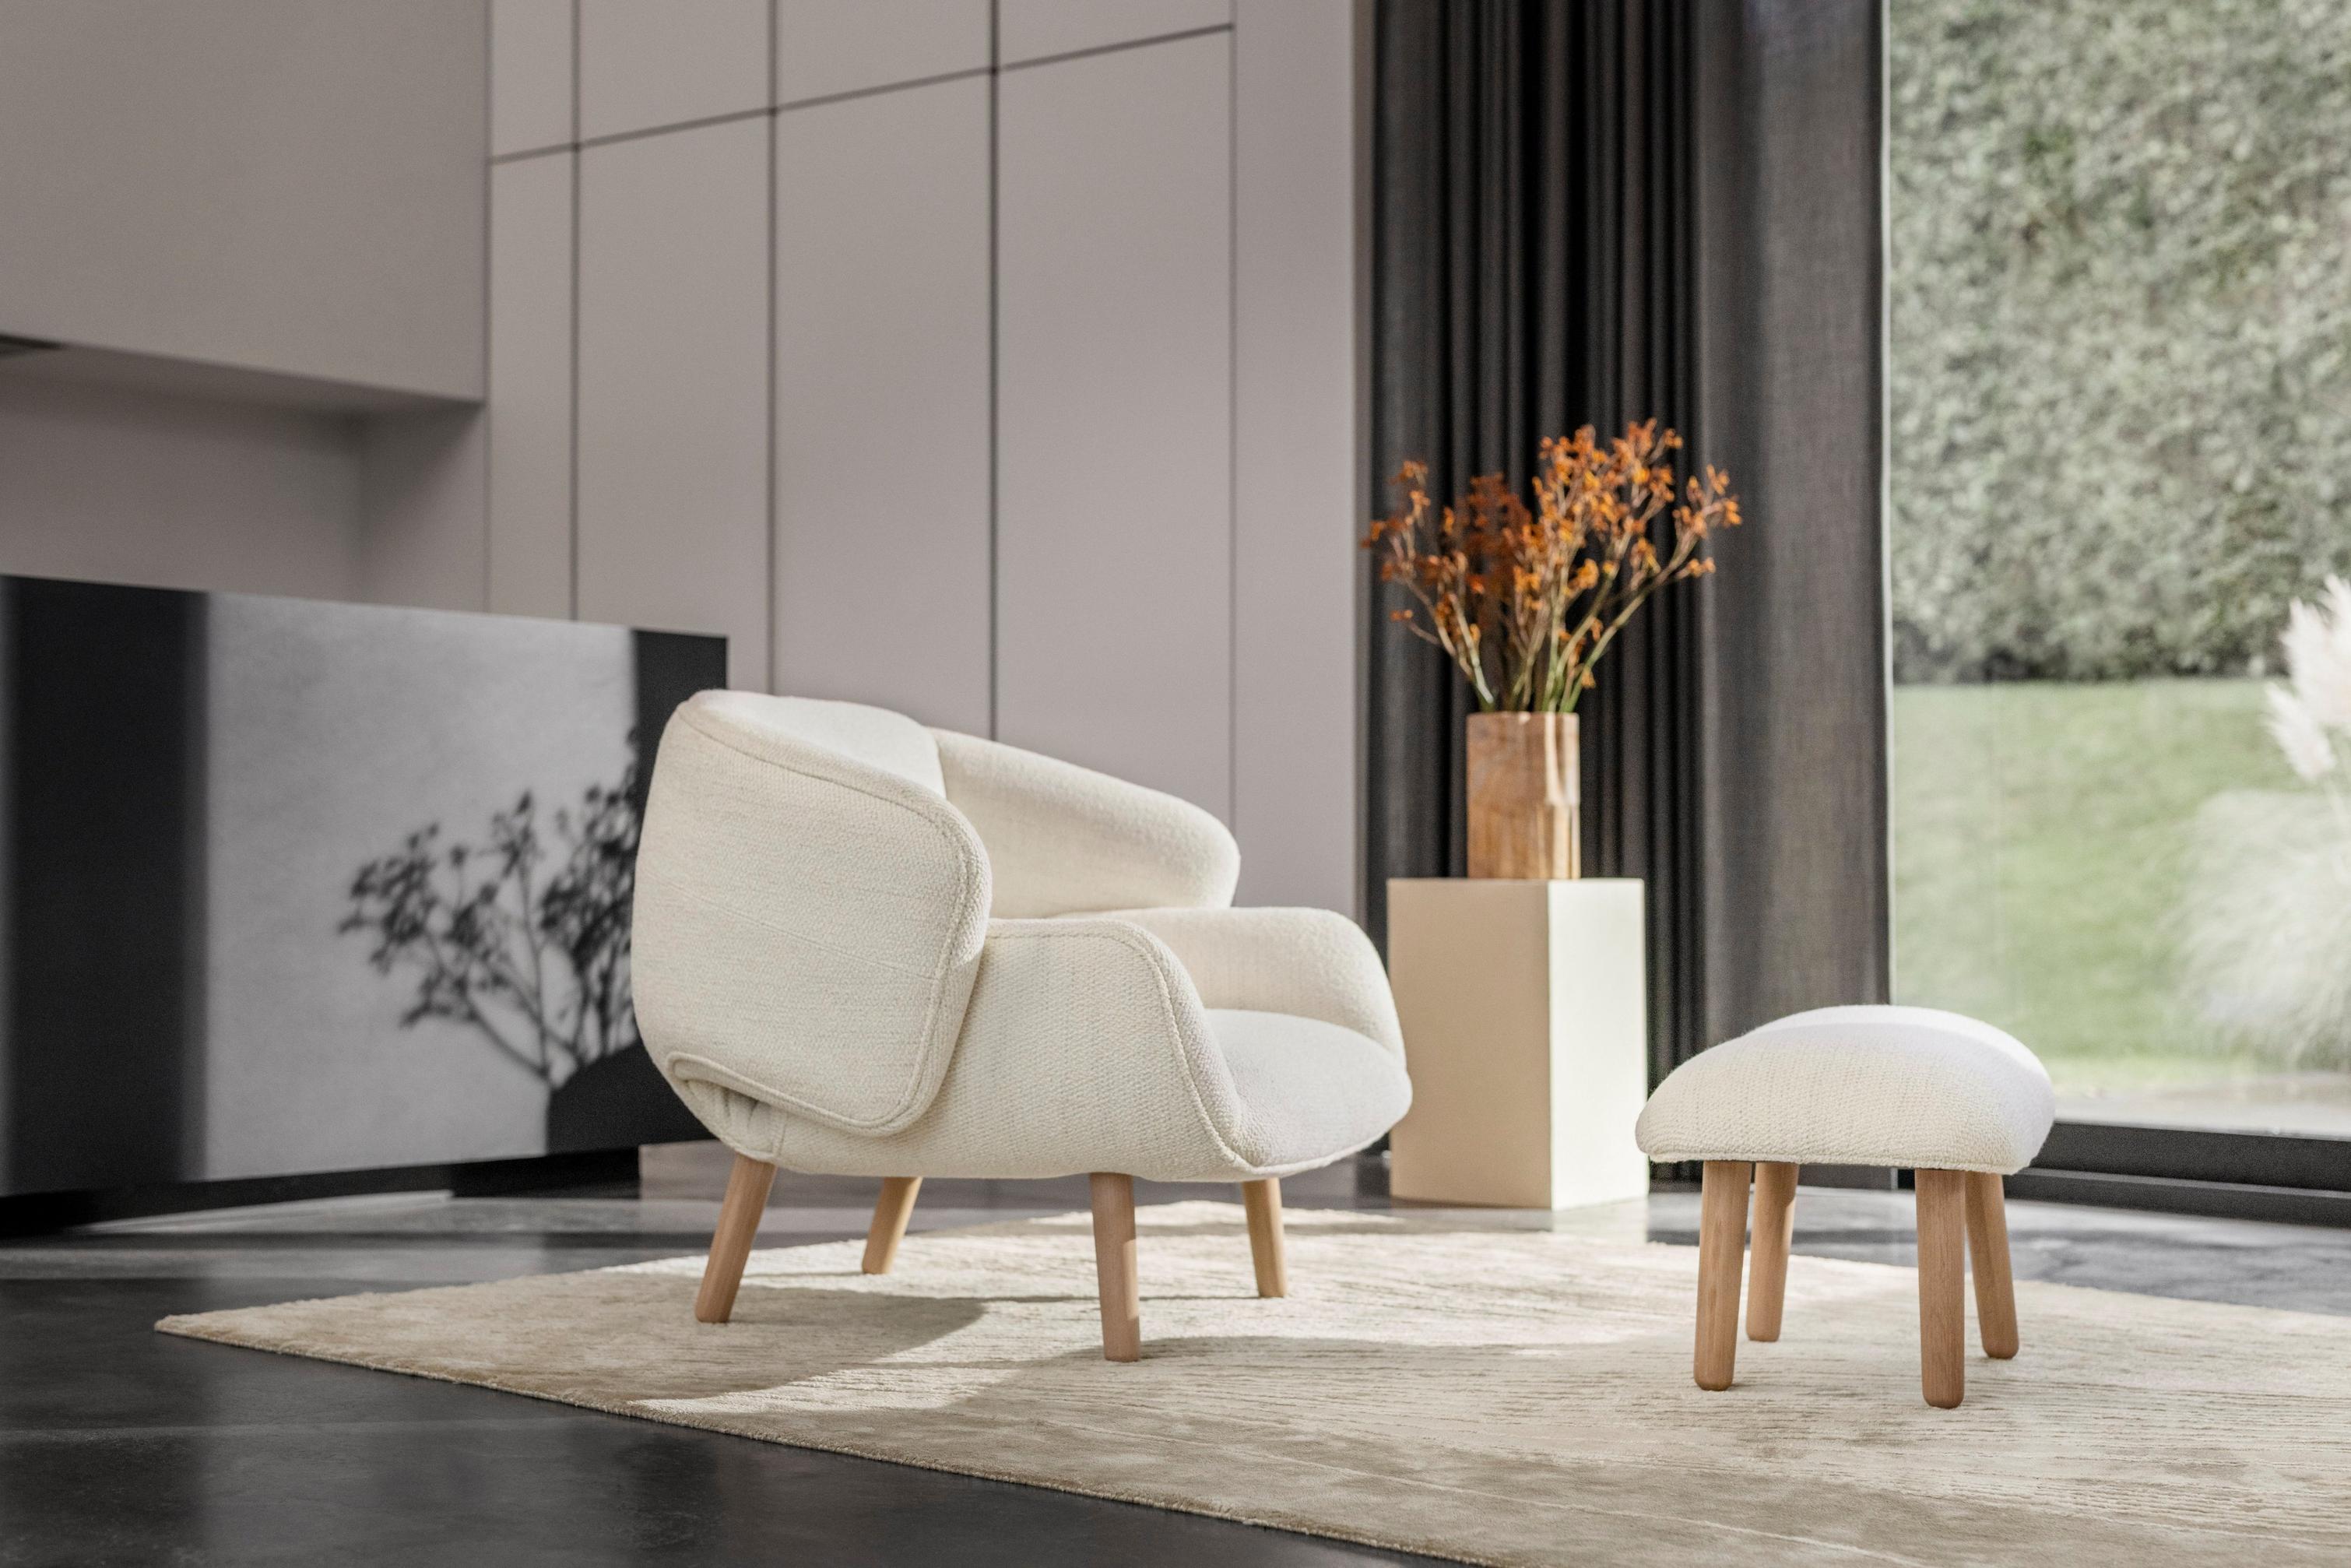 Bright living room featuring the Fusion chair in white Lazio fabric and matching footstool.